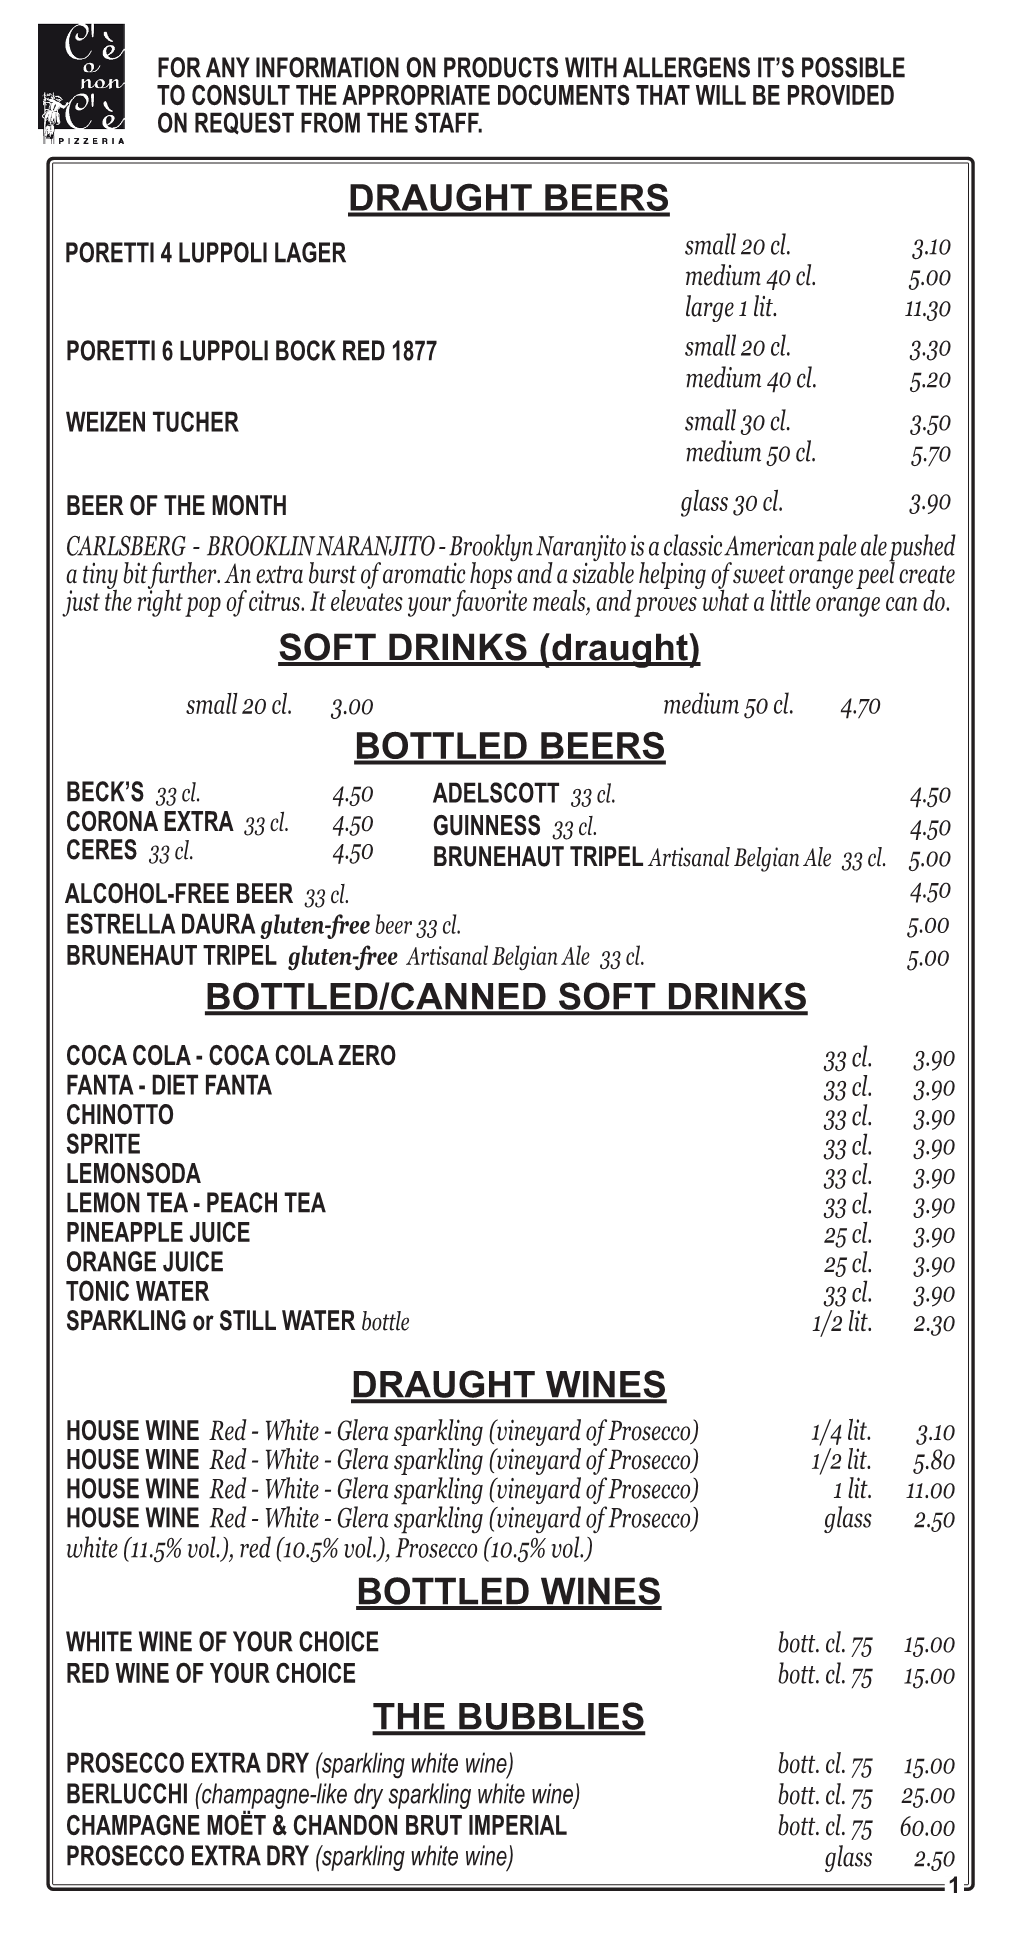 Draught Beers Soft Drinks